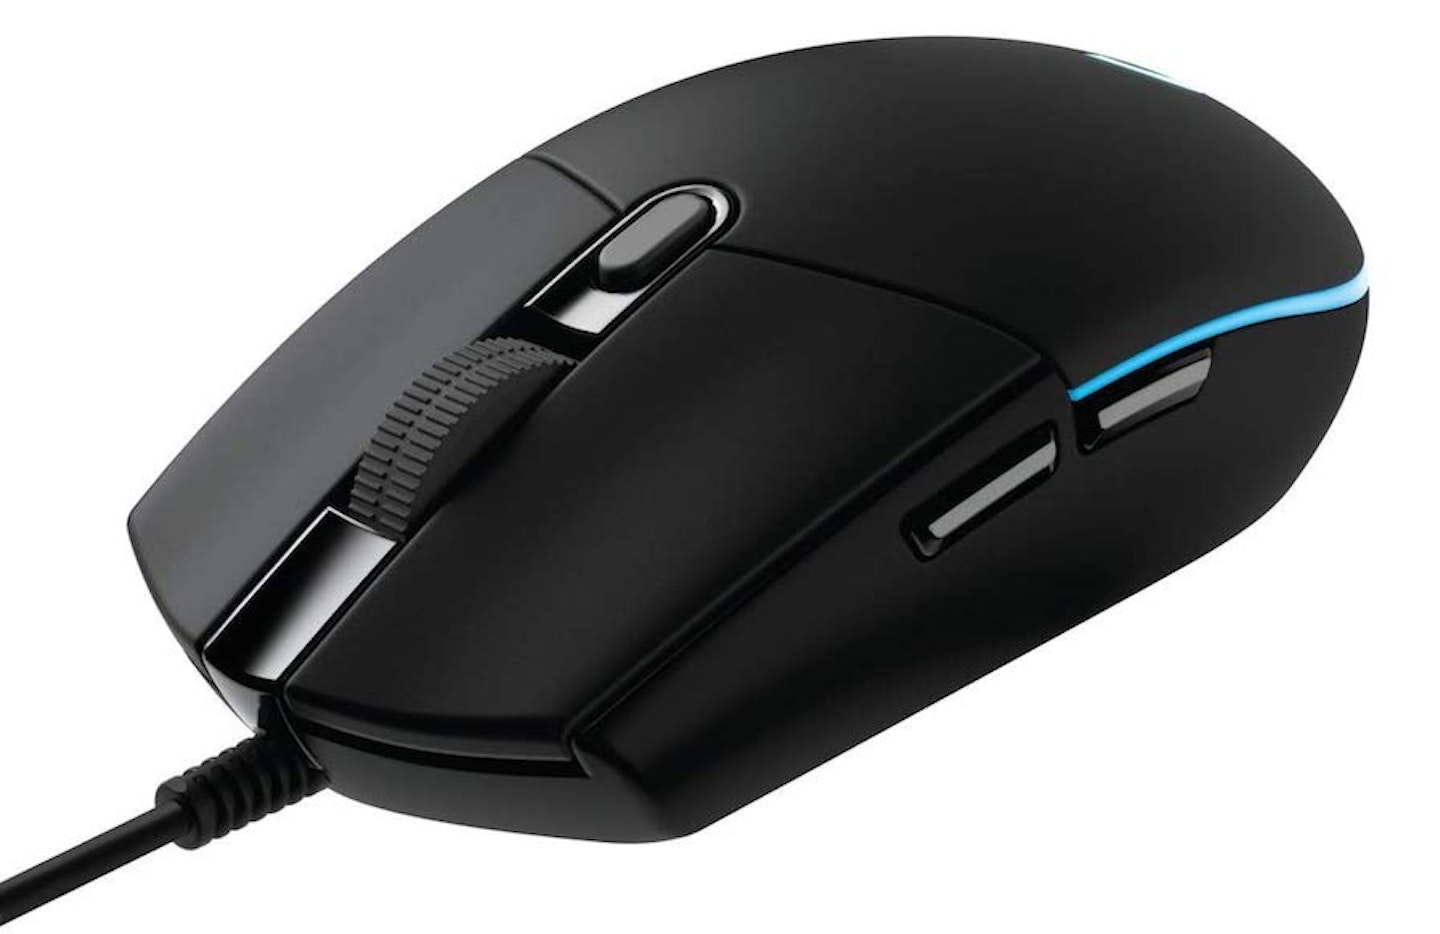 Logitech G203 Customising Wired Gaming Mouse, Optical 8000 DPI, 16.8 M Colour LED, £22.99 (R.R.P. £34.99)